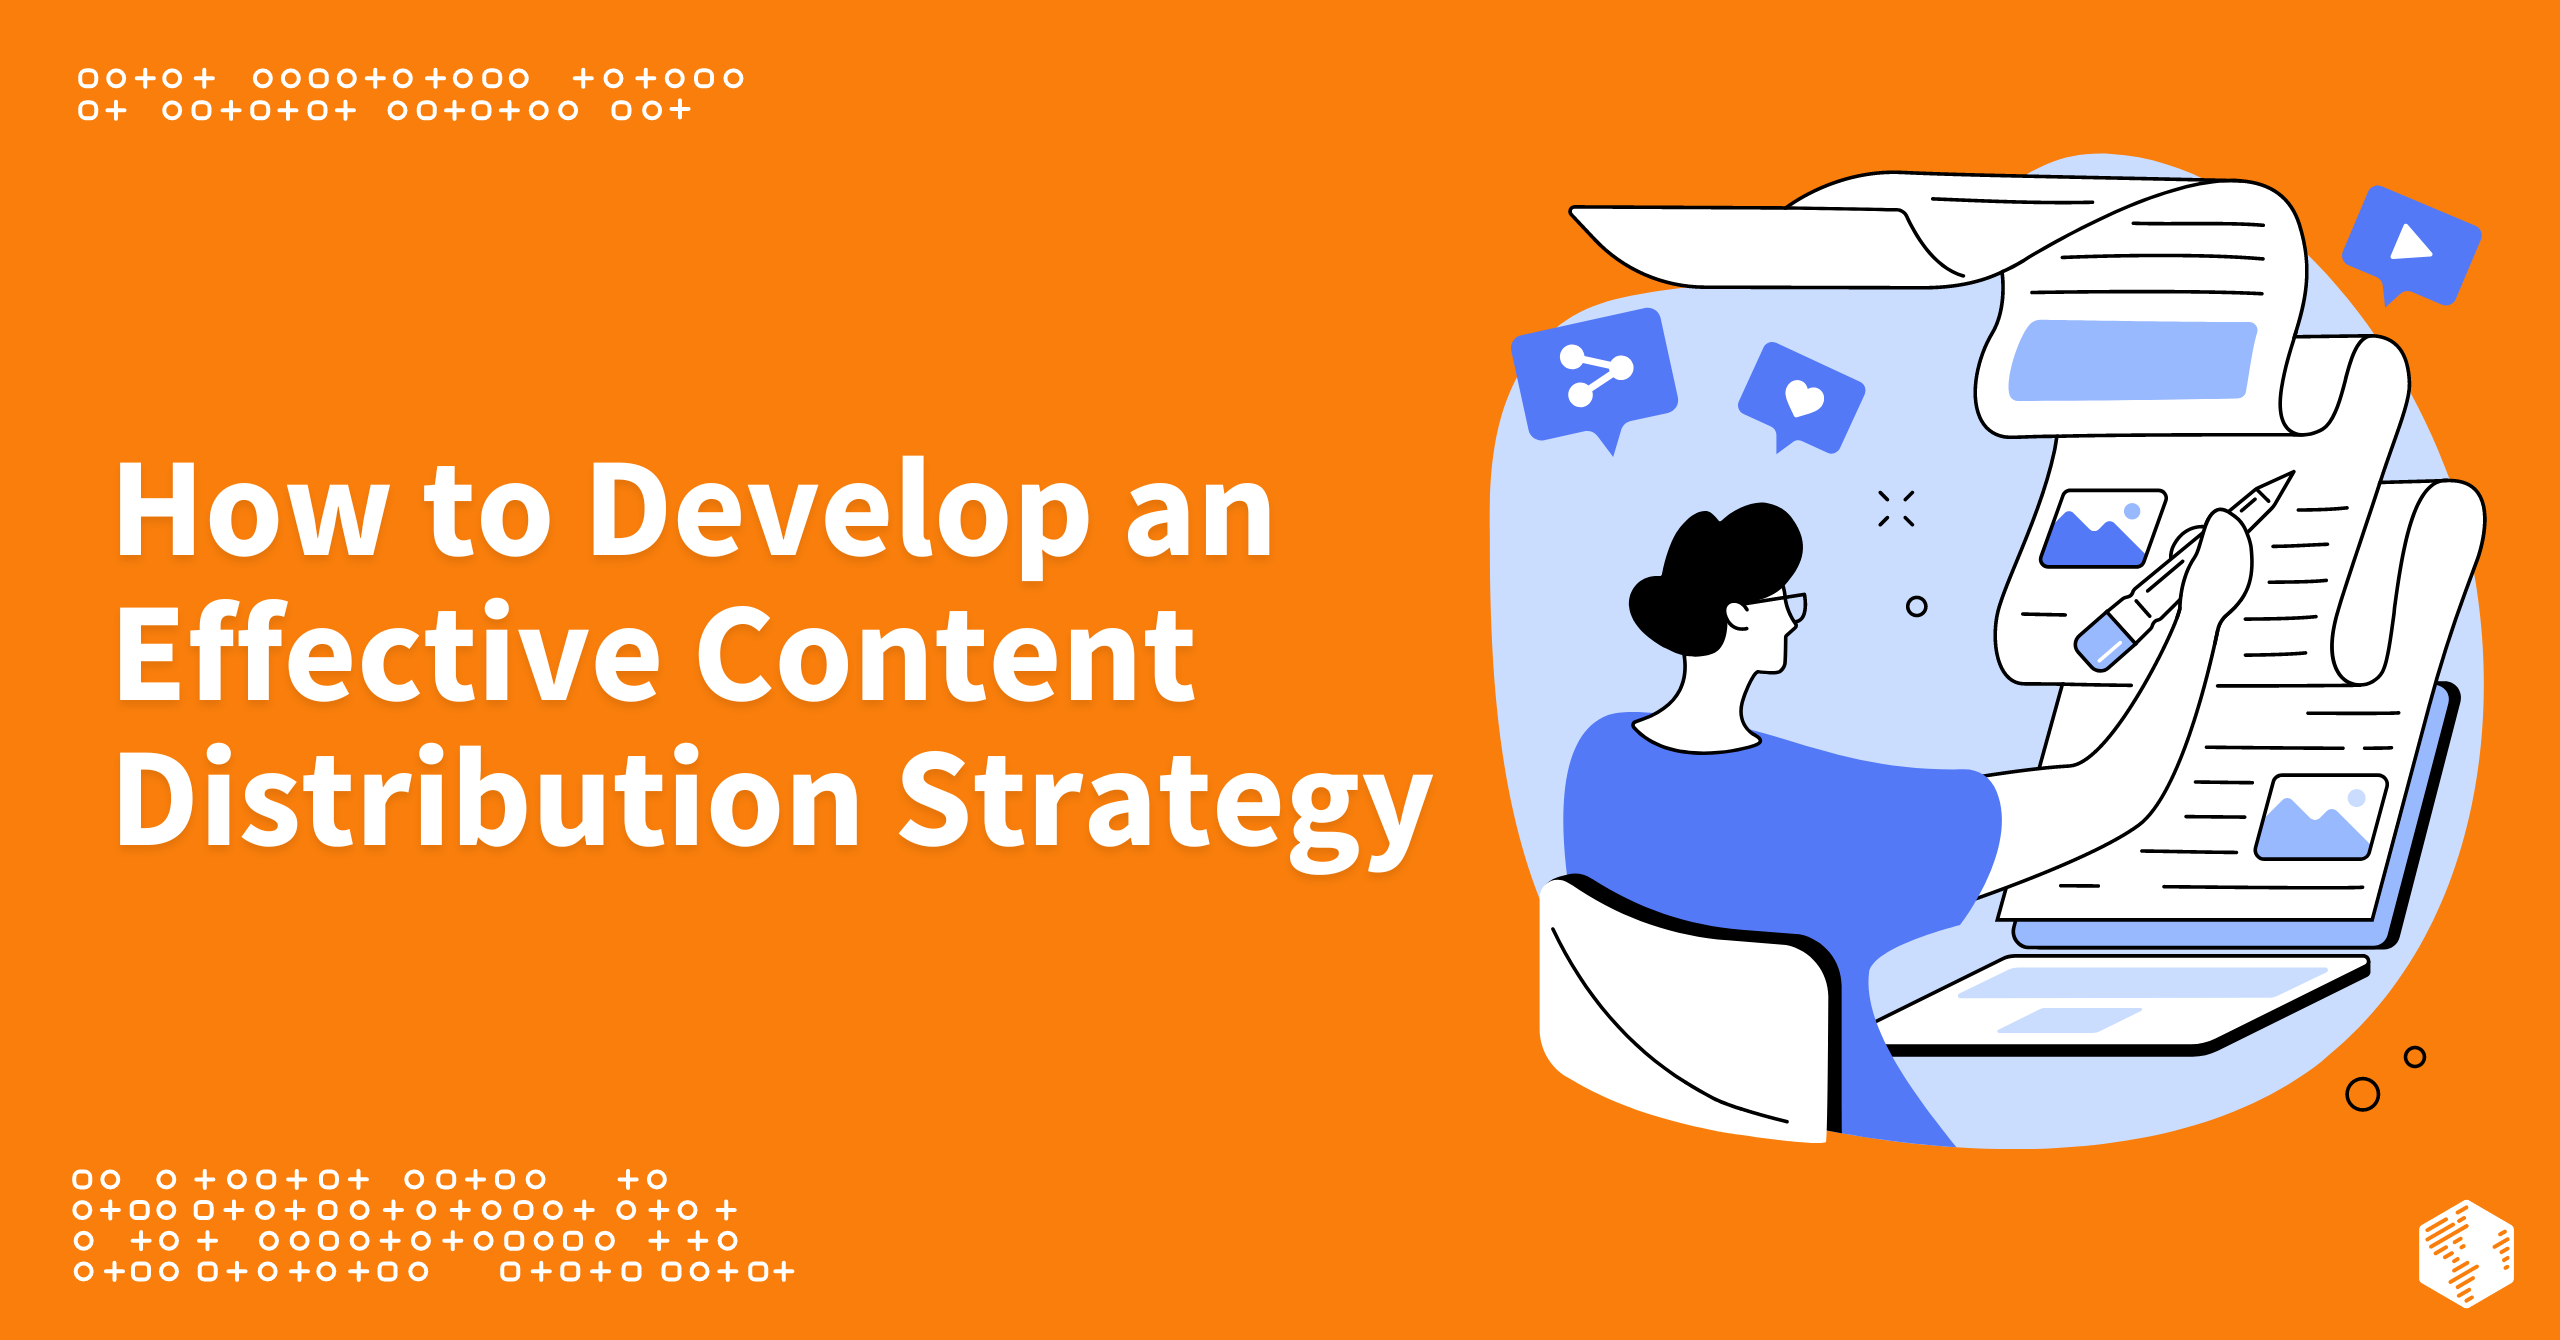 Content Distribution Strategies: Getting Your Content Seen